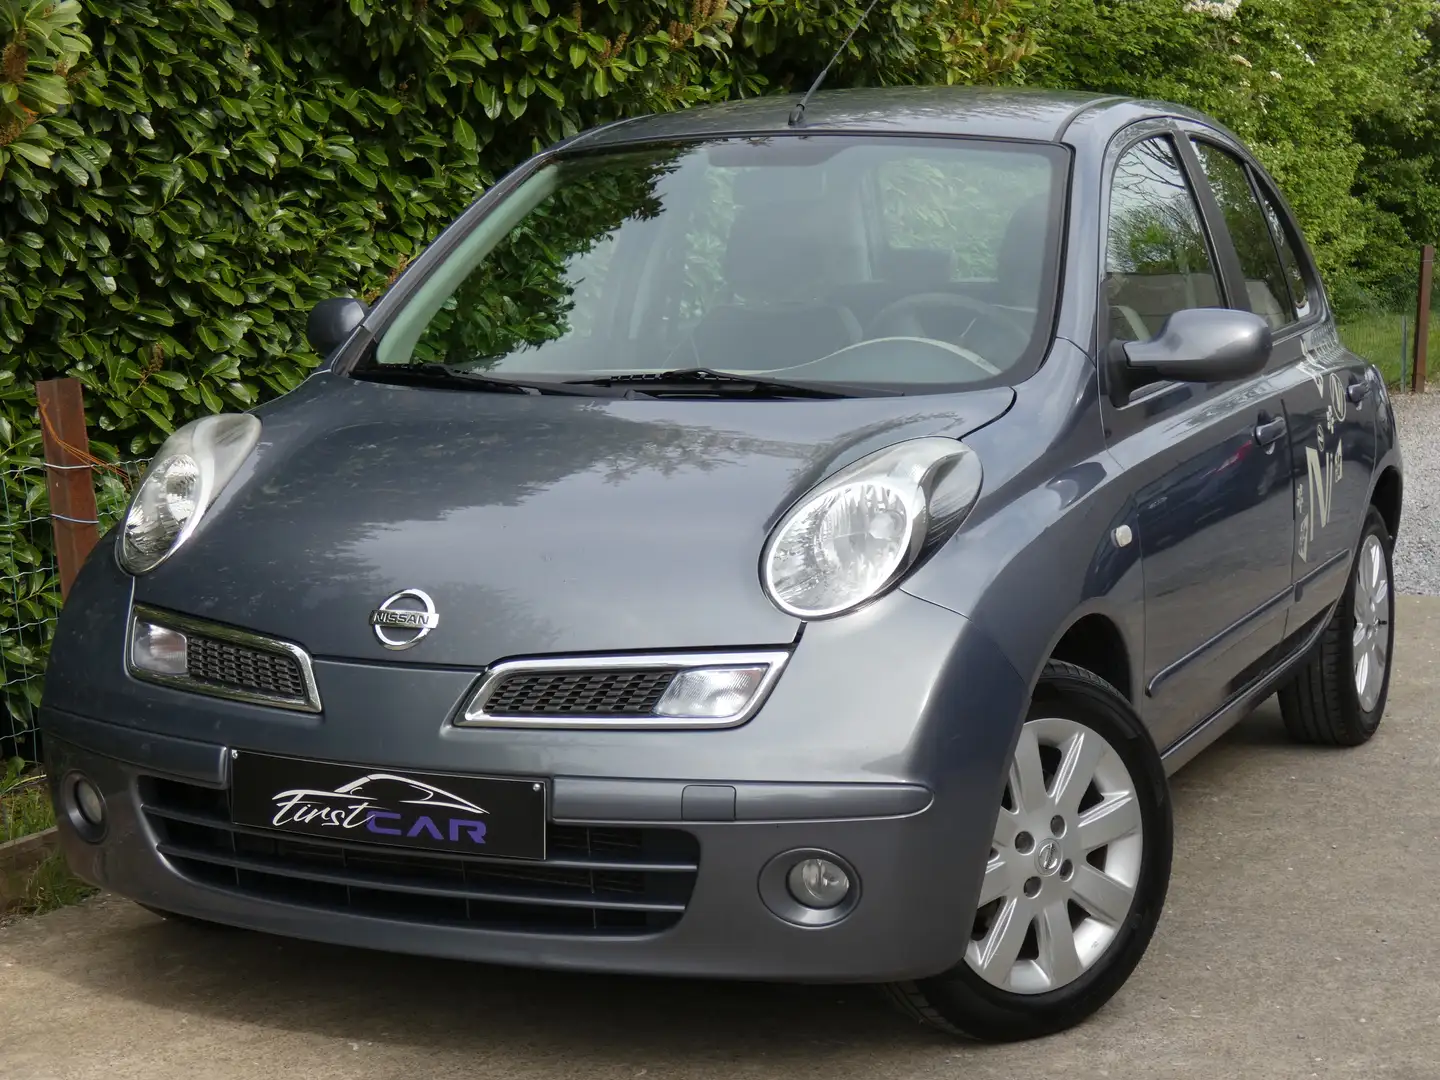 Nissan Micra 1.2i - Full Carnet Entretien - Air Conditionne Grey - 1